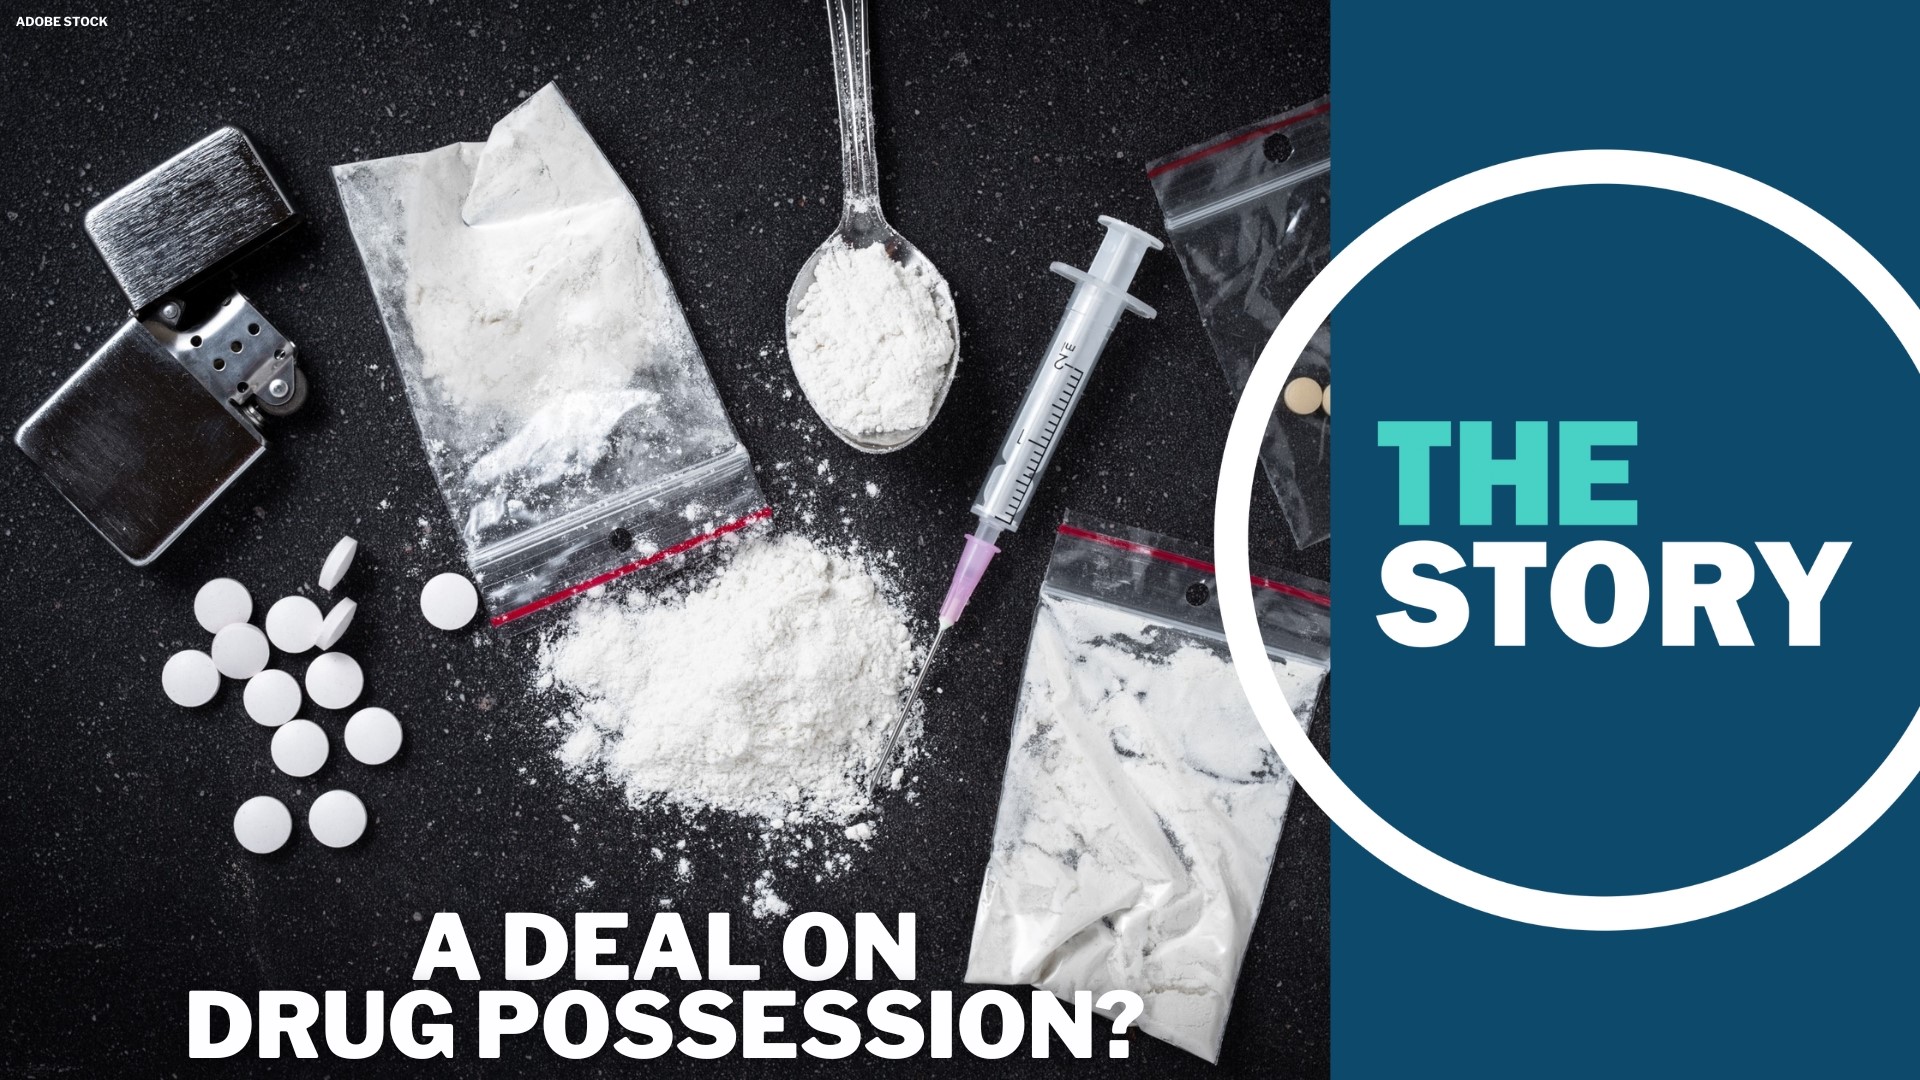 Democrats appeared to be nearing a compromise with their Republican colleagues, producing a bill with stiffer penalties for people caught in possession of drugs.